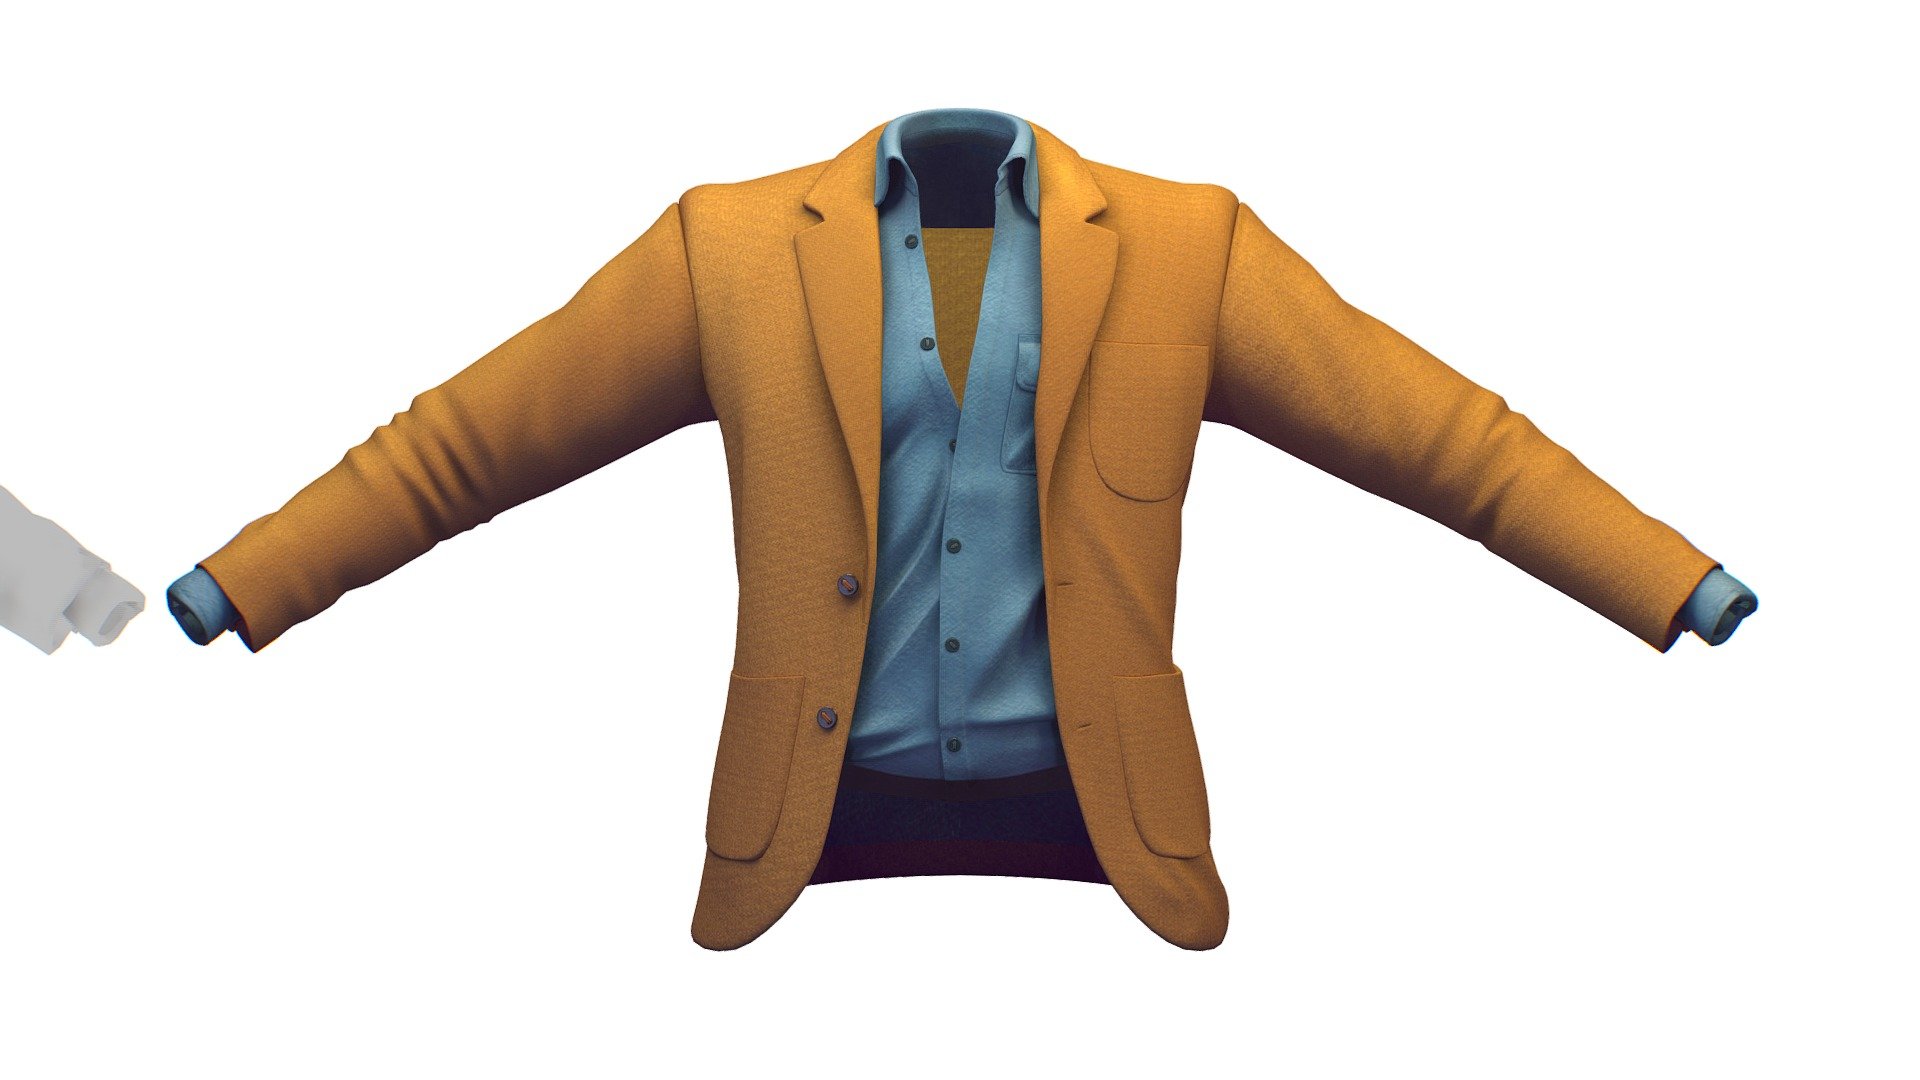 Cartoon High Poly Subdivision Blue Shirt Jacket

No HDRI map, No Light, No material settings - only Diffuse/Color Map Texture (2500x2500)

More information about the 3D model: please use the Sketchfab Model Inspector - Key (i) - Cartoon High Poly Subdivision Blue Shirt Jacket - Buy Royalty Free 3D model by Oleg Shuldiakov (@olegshuldiakov) 3d model